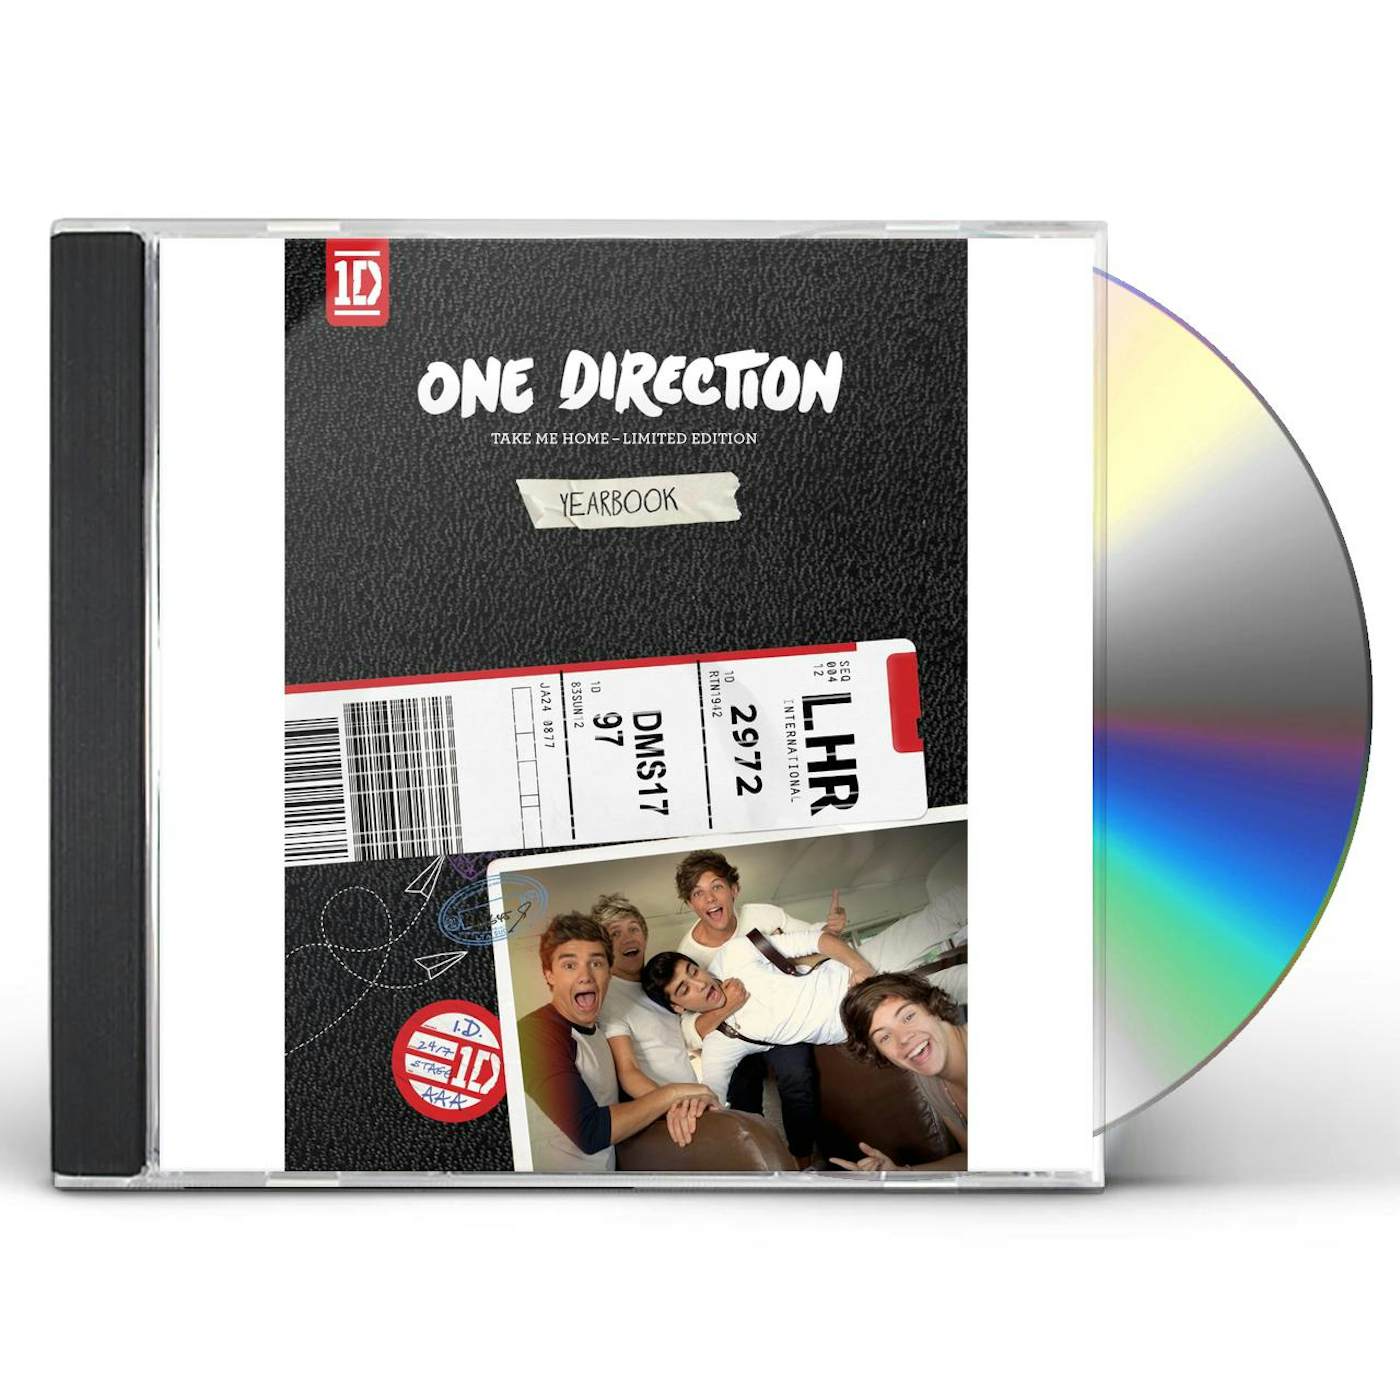 One Direction TAKE ME HOME: YEARBOOK EDITION (EUROPEAN) CD